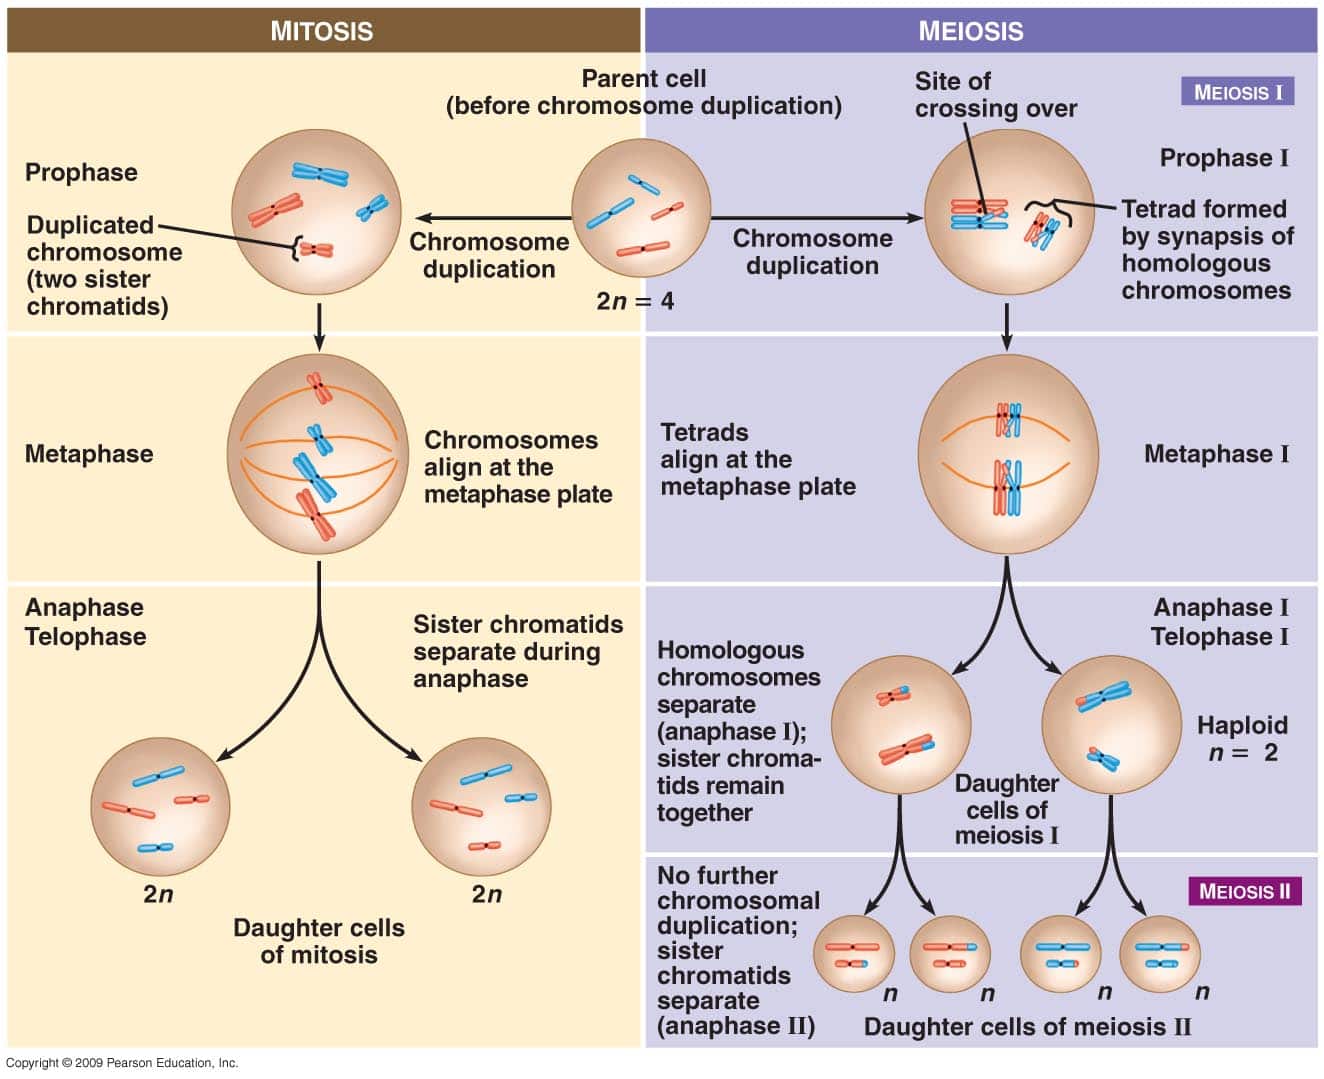 mitosis vs meiosis differences